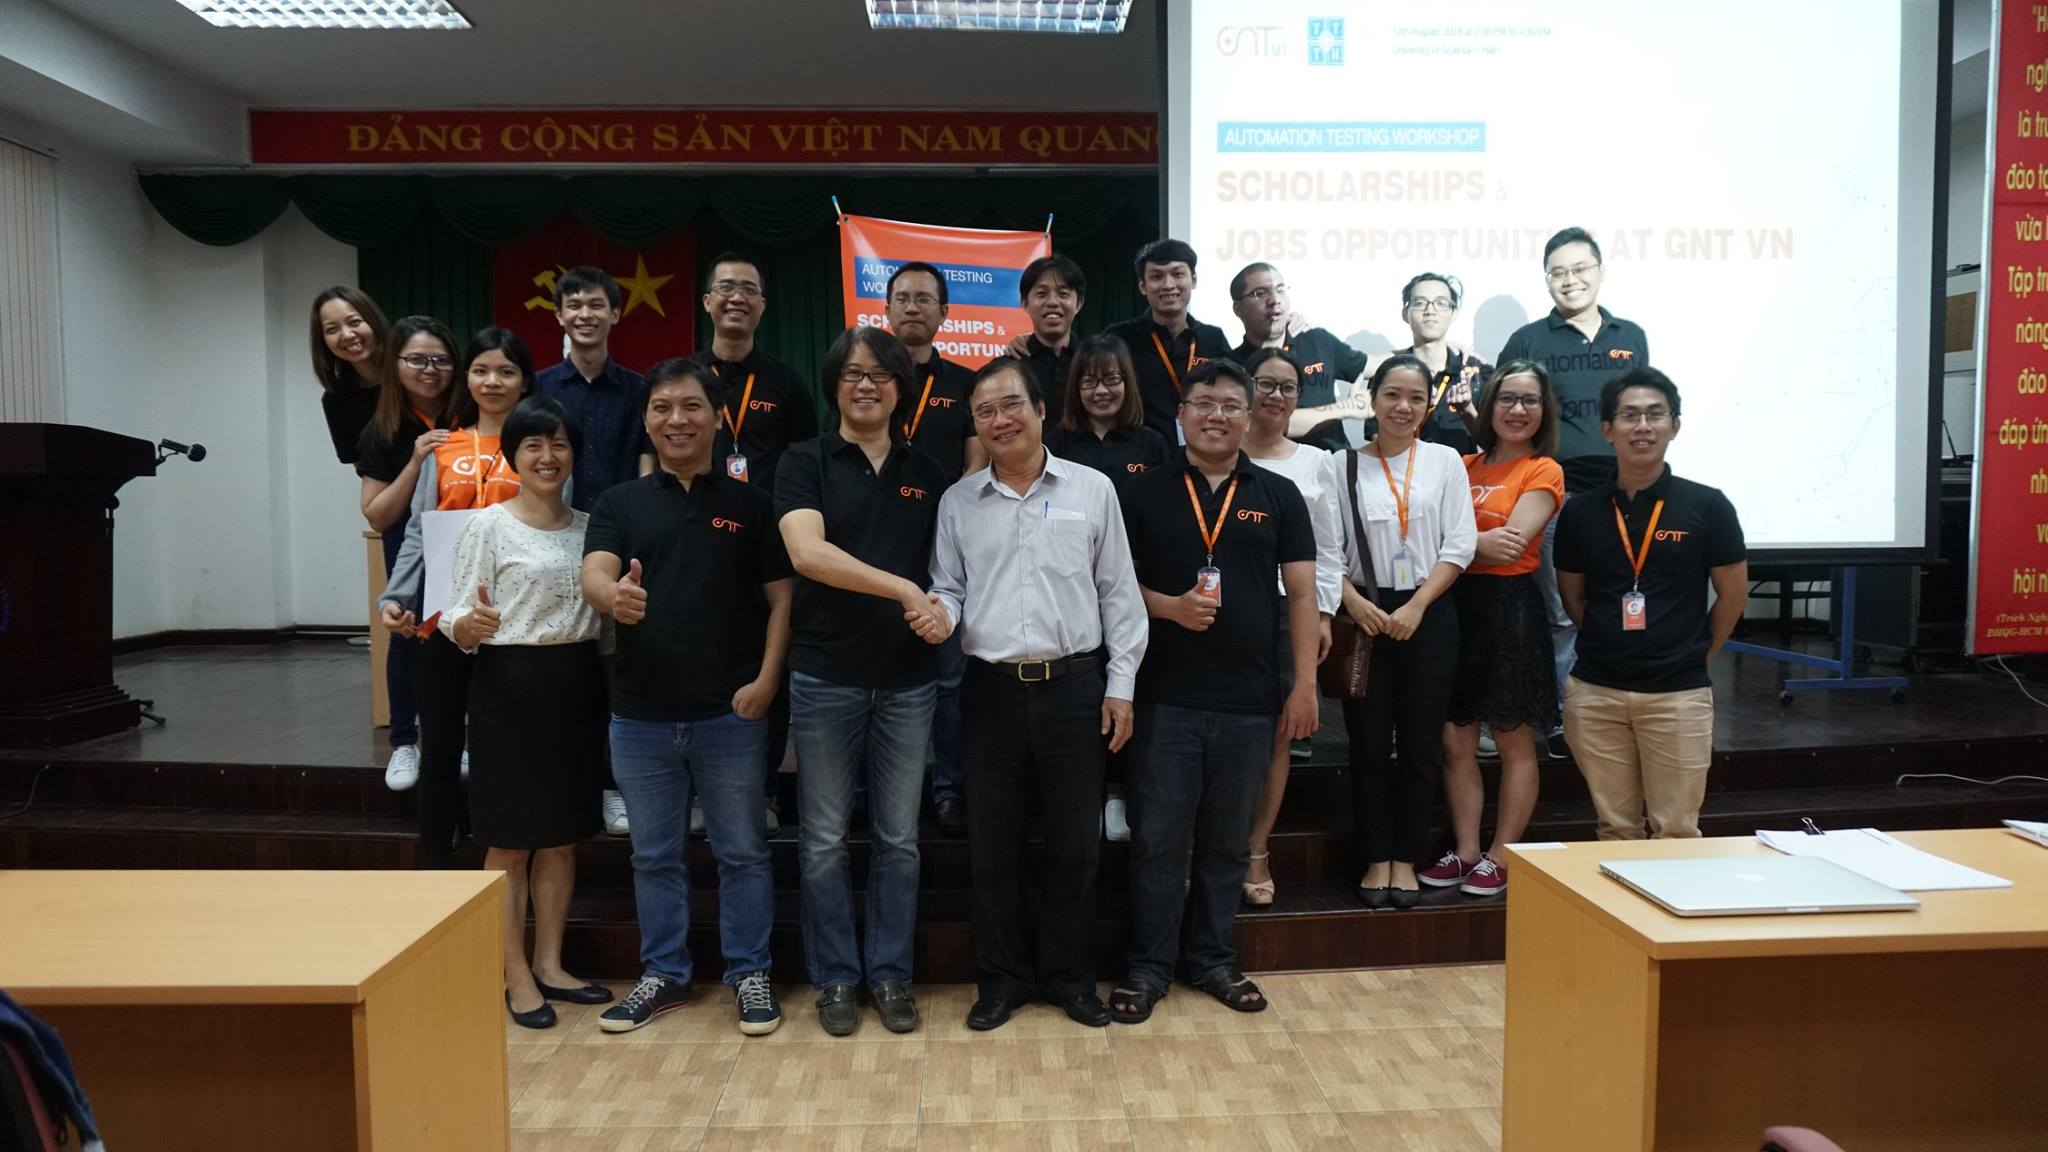 GIANTY VN organized an Automation Testing workshop and awarded scholarships at the Informatics Center of Ho Chi Minh City University of Natural Sciences. HCM